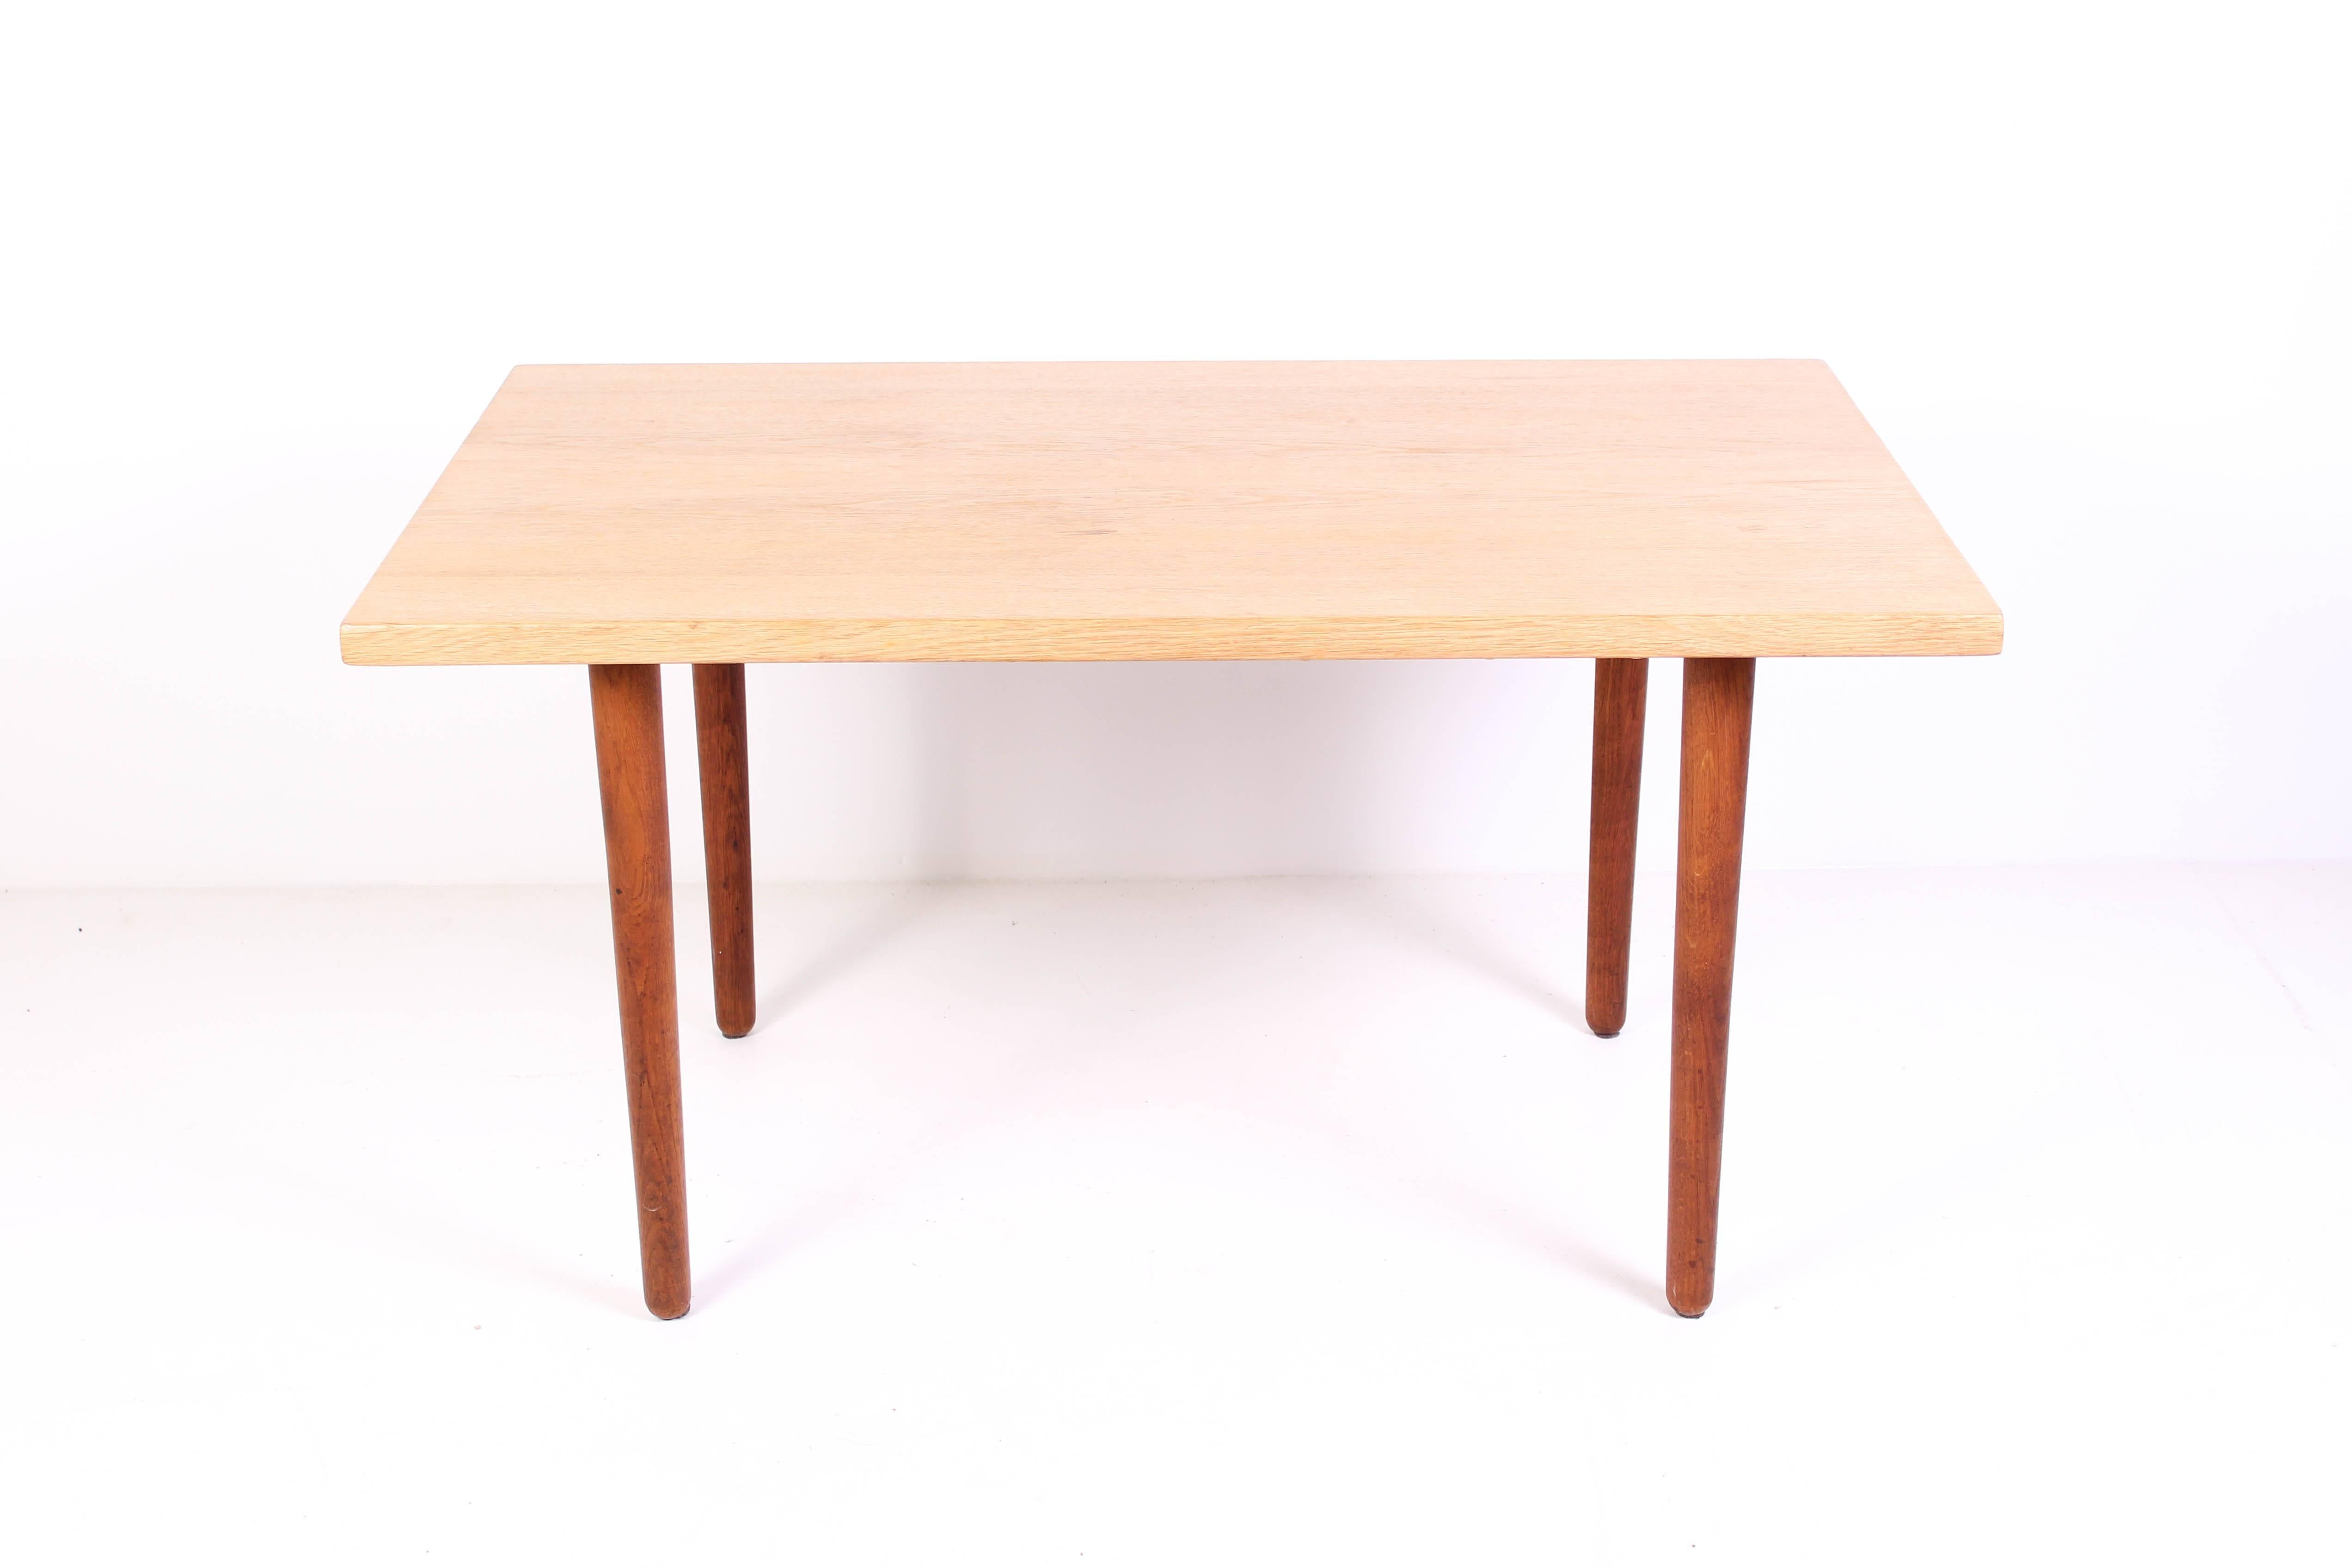 Midcentury Danish coffee table by famous designer Hans J Wegner. The table was produced by Andreas Tuck and is in good vintage condition with minor signs of usage.